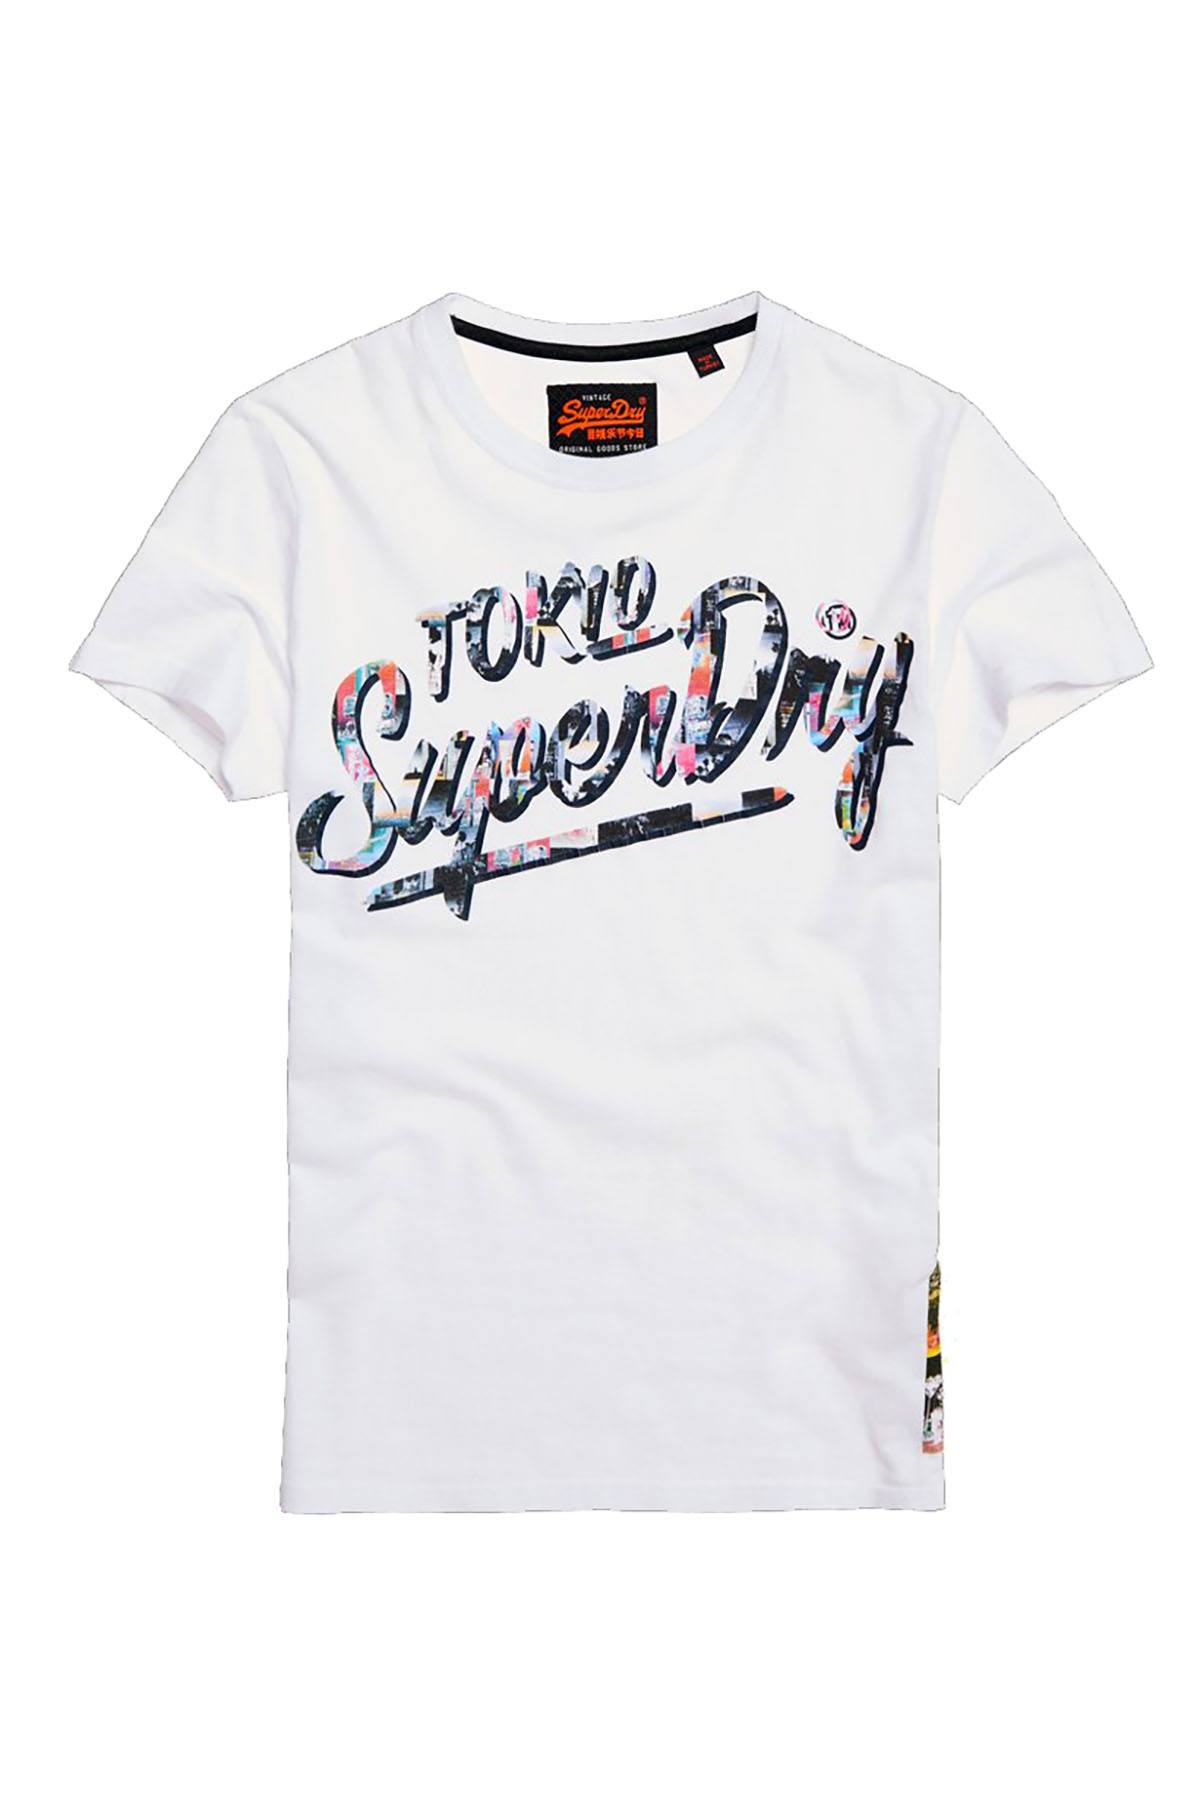 SuperDry Optic-White Ticket Type T-Shirt